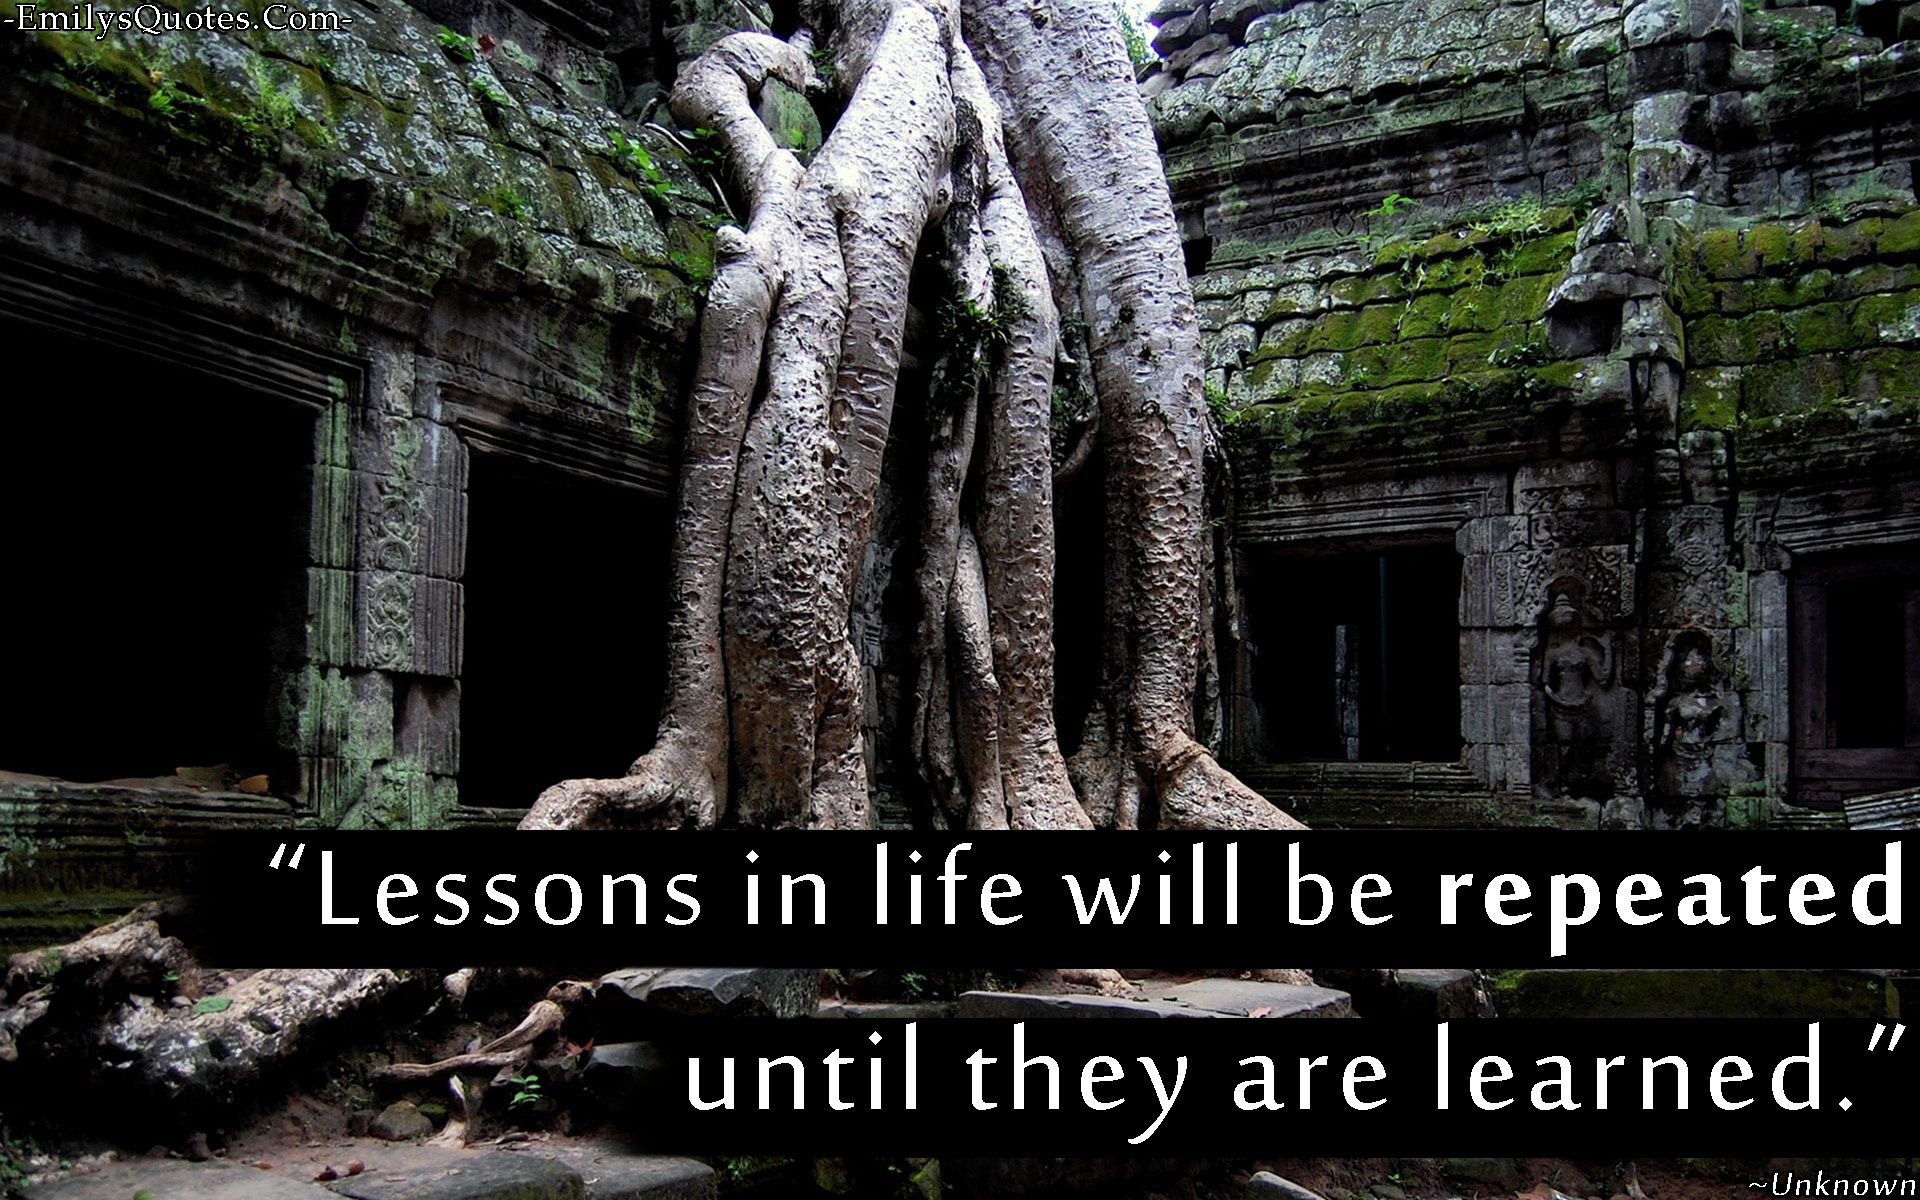 Lessons in life will be repeated until they are learned